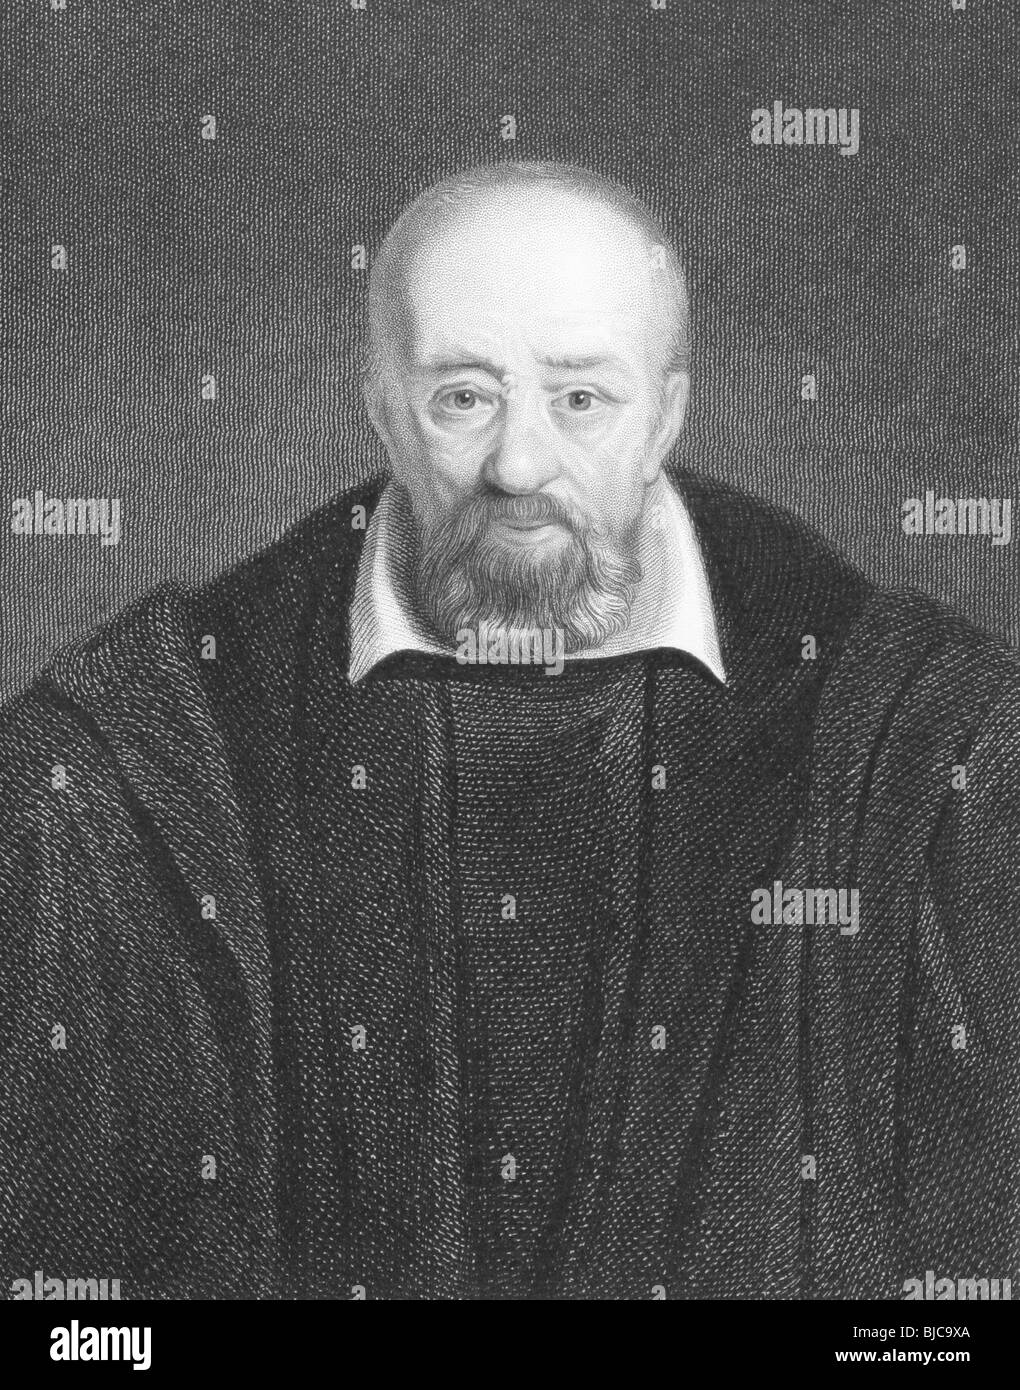 George Buchanan (1506-1582) on engraving from the 1800s. Scottish historian and humanist scholar. Stock Photo